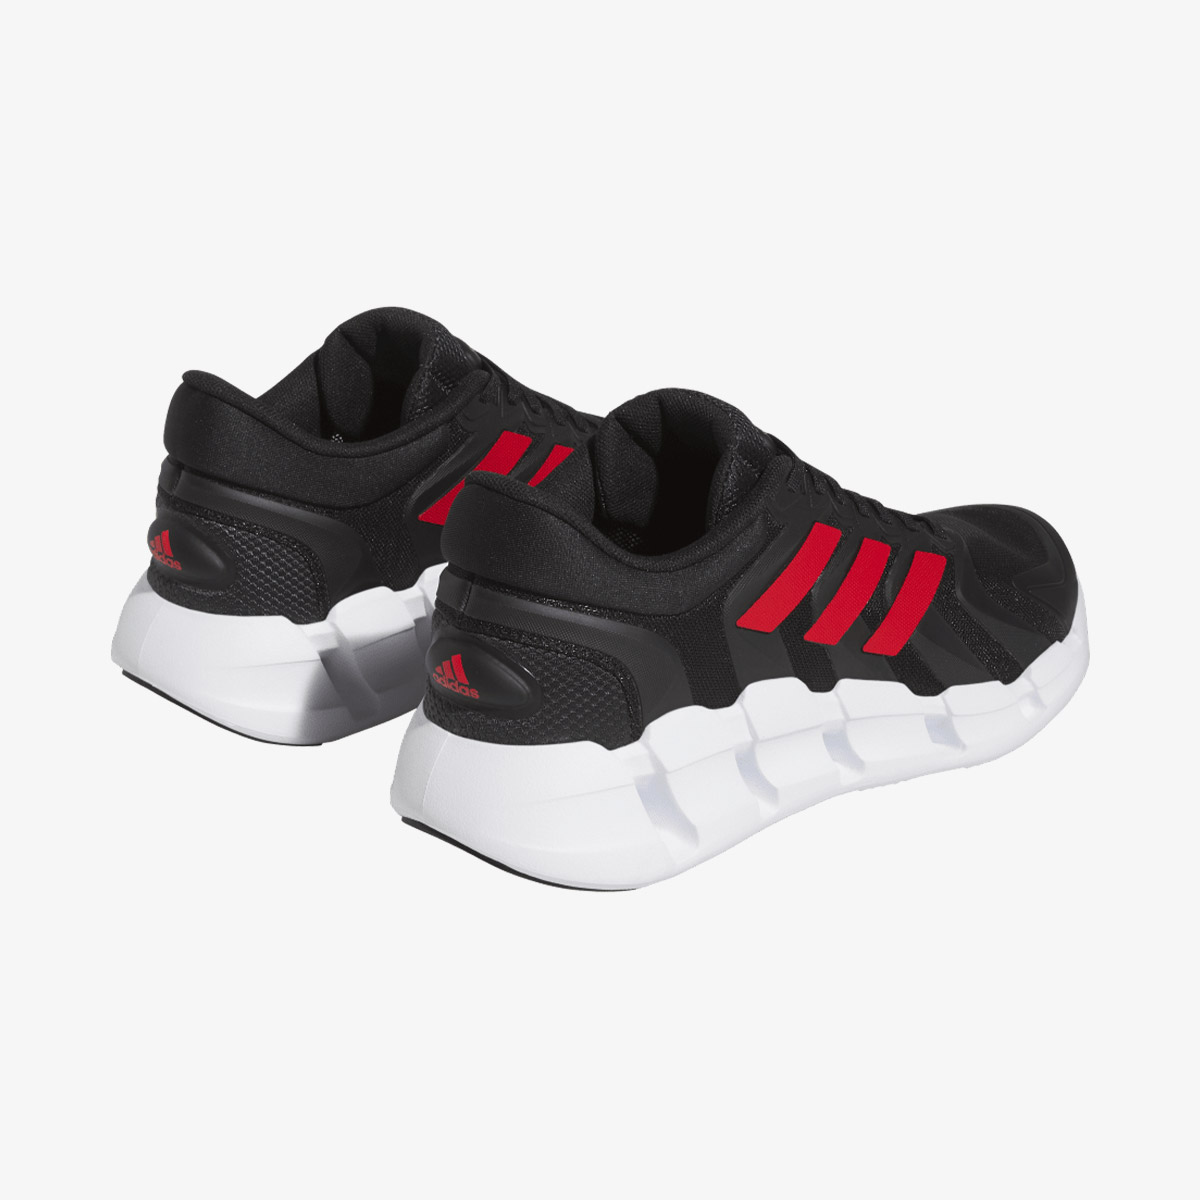 VENTICE CLIMACOOL 